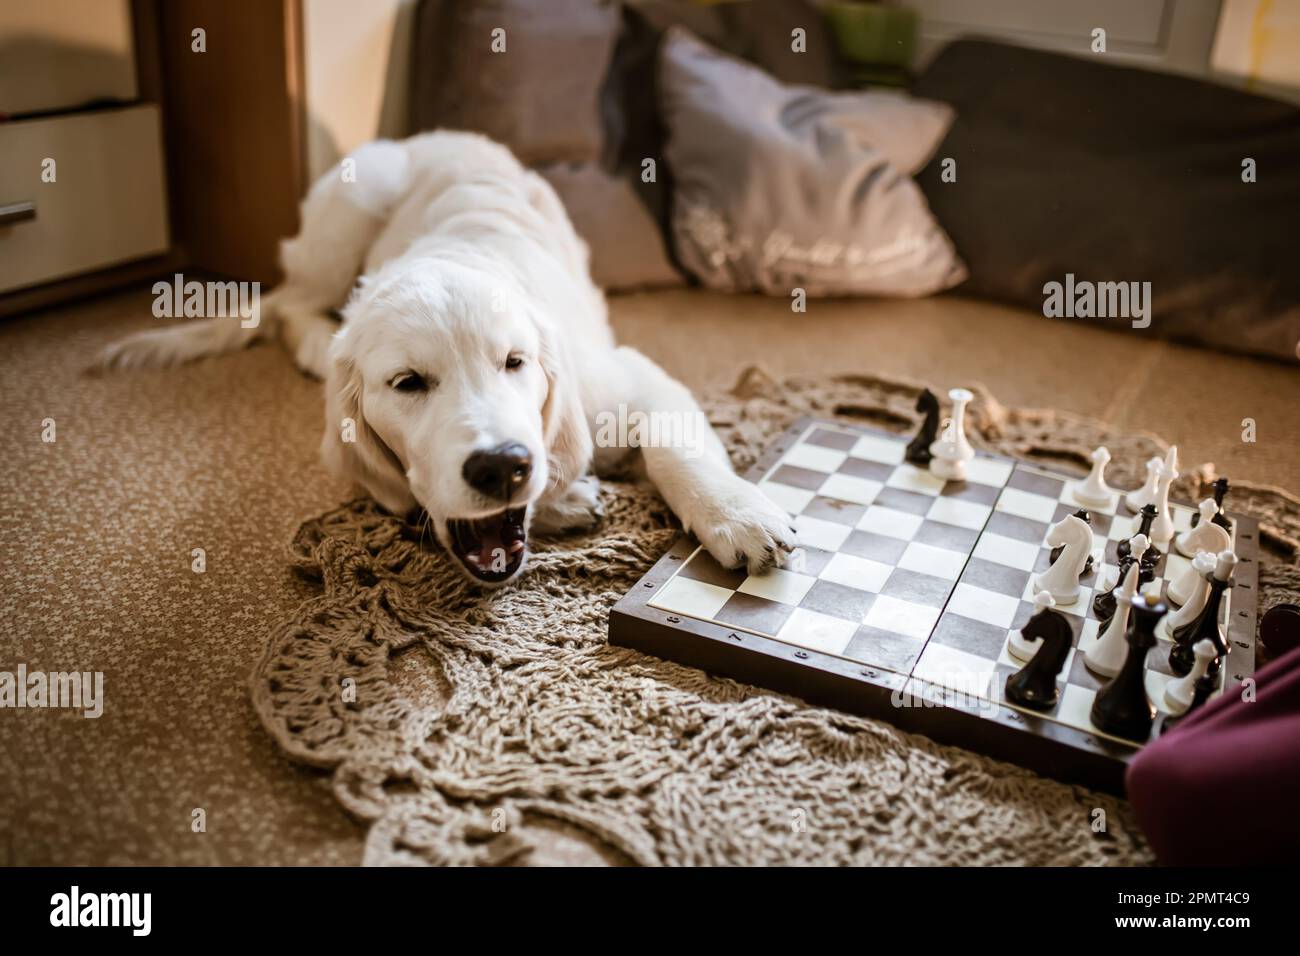 Play Chess Online With Your Pets 